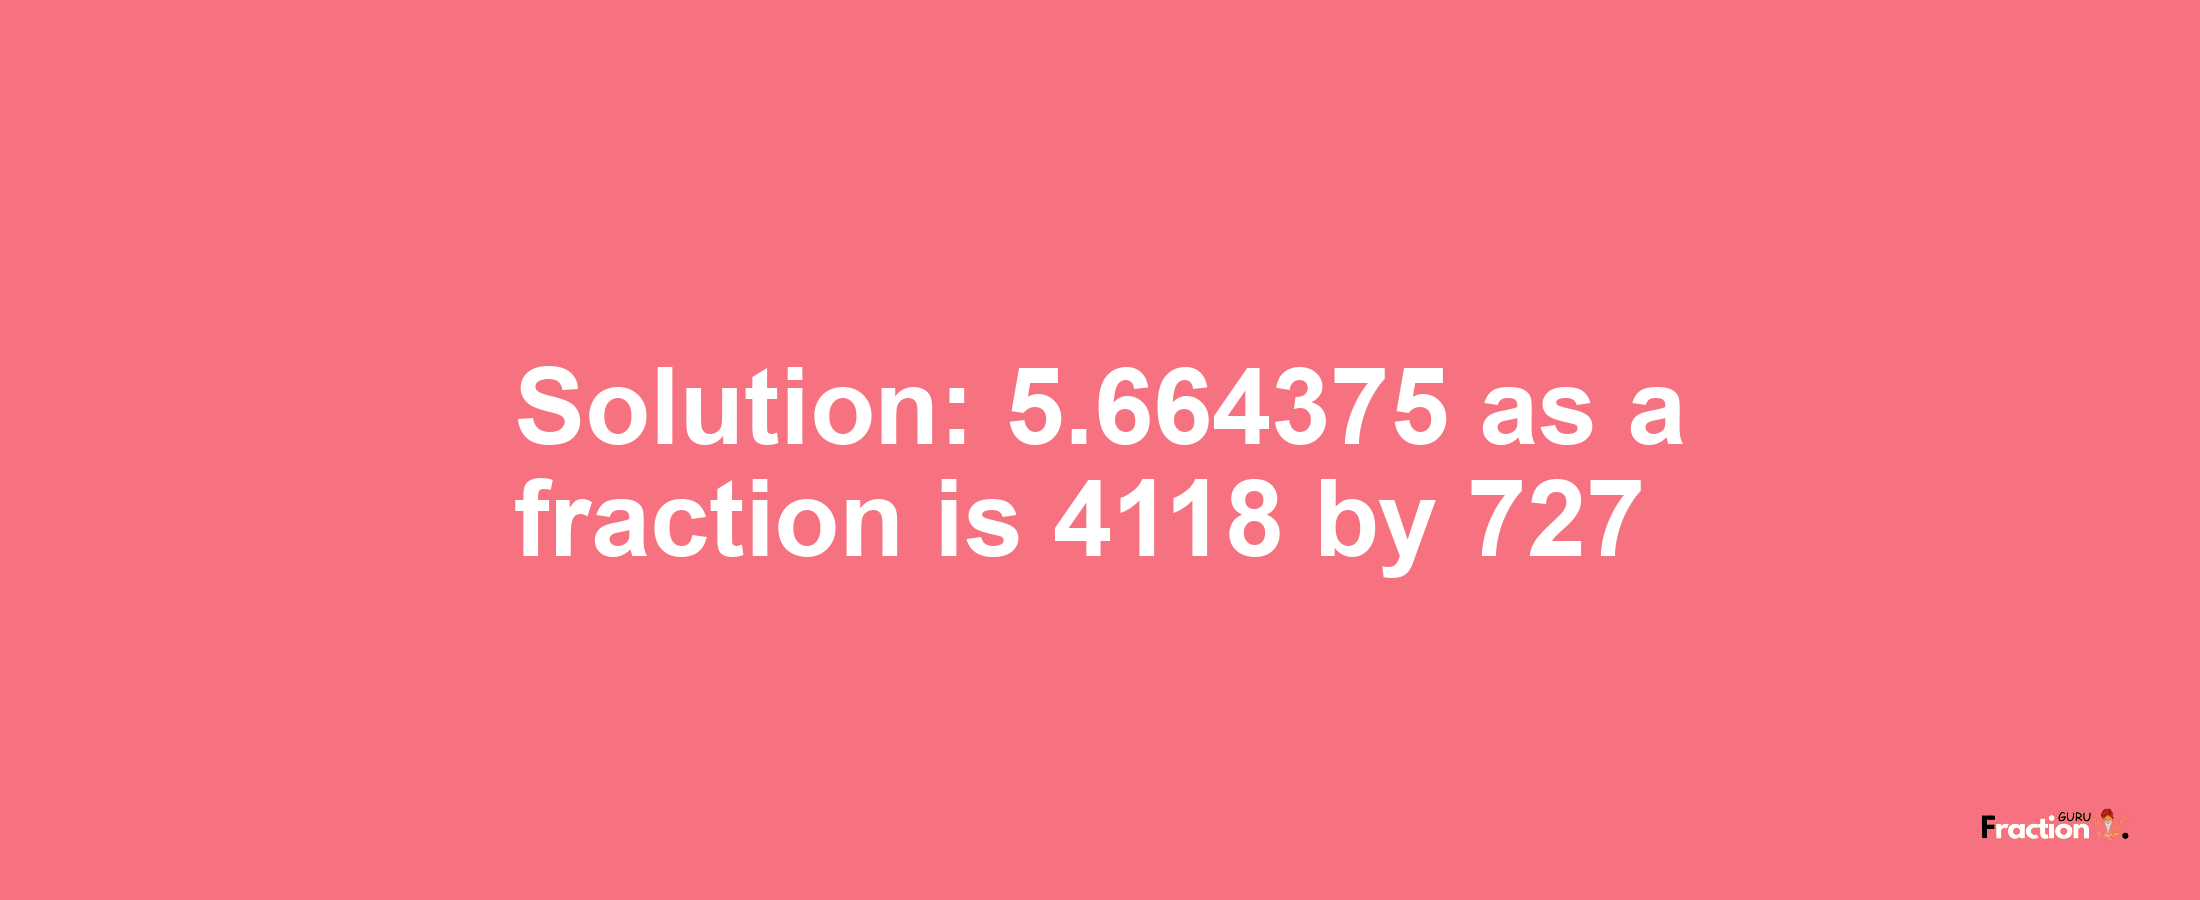 Solution:5.664375 as a fraction is 4118/727